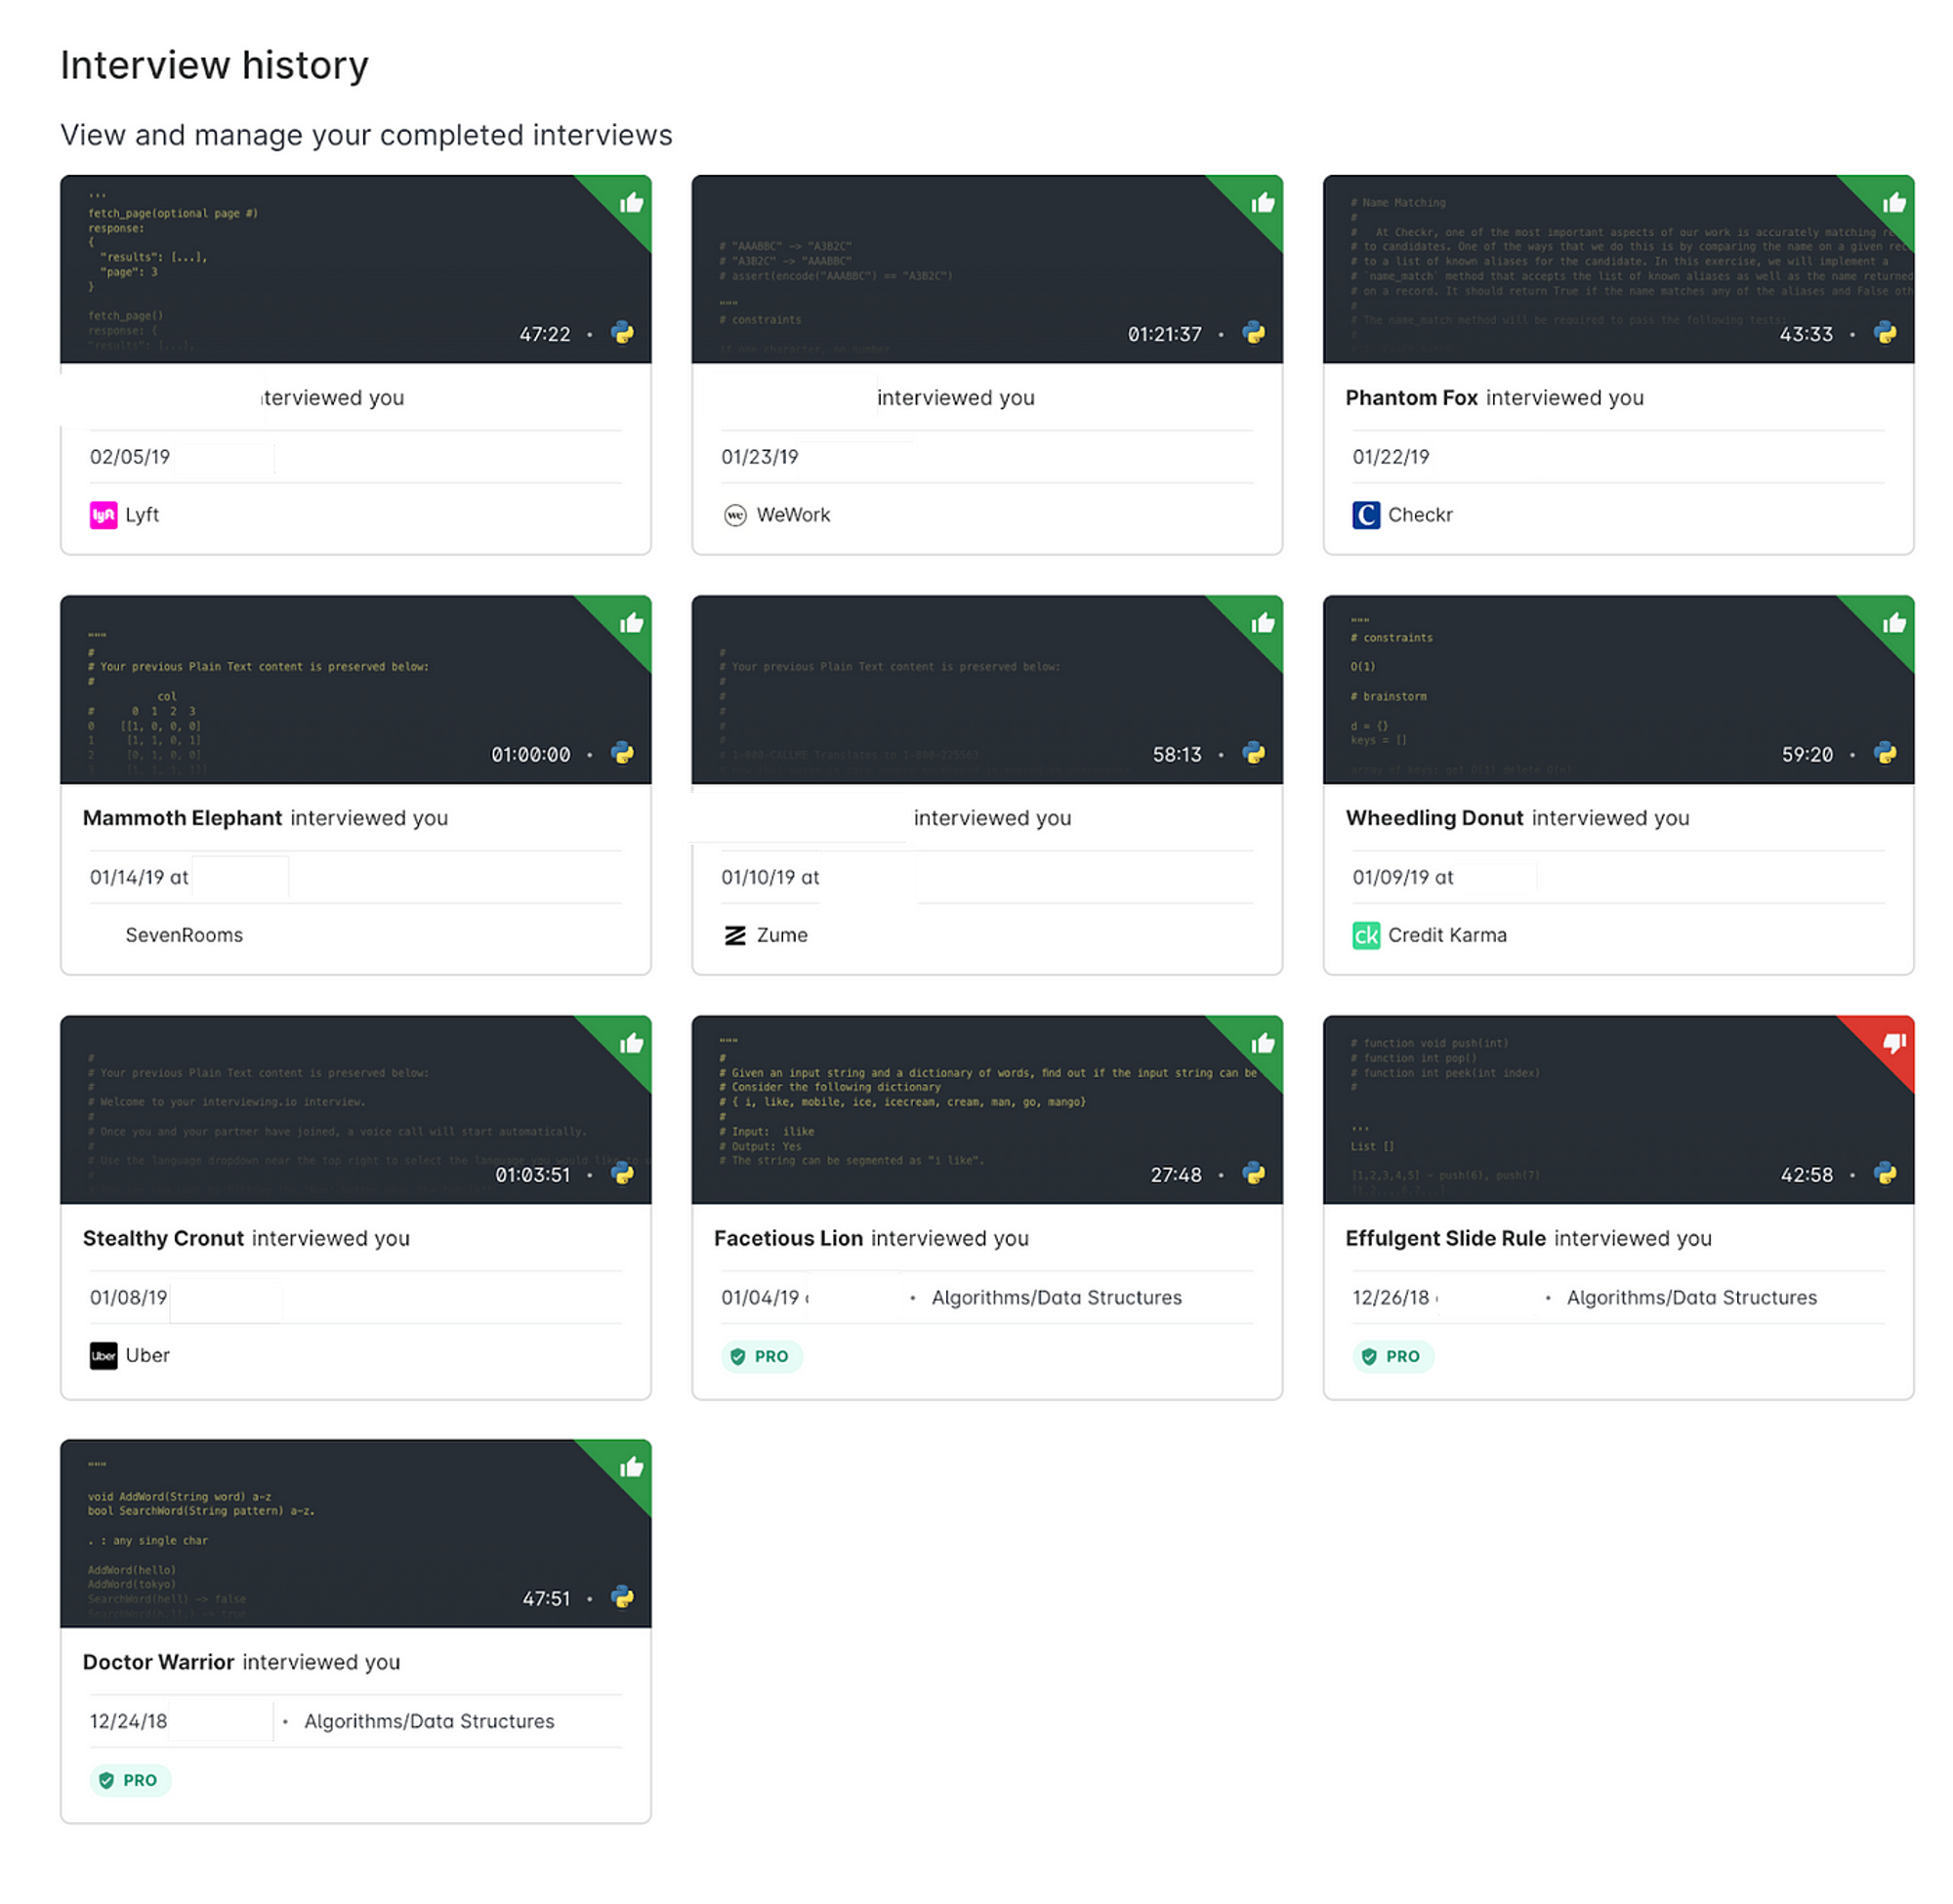 My interviewing.io history (interviewer names redacted)